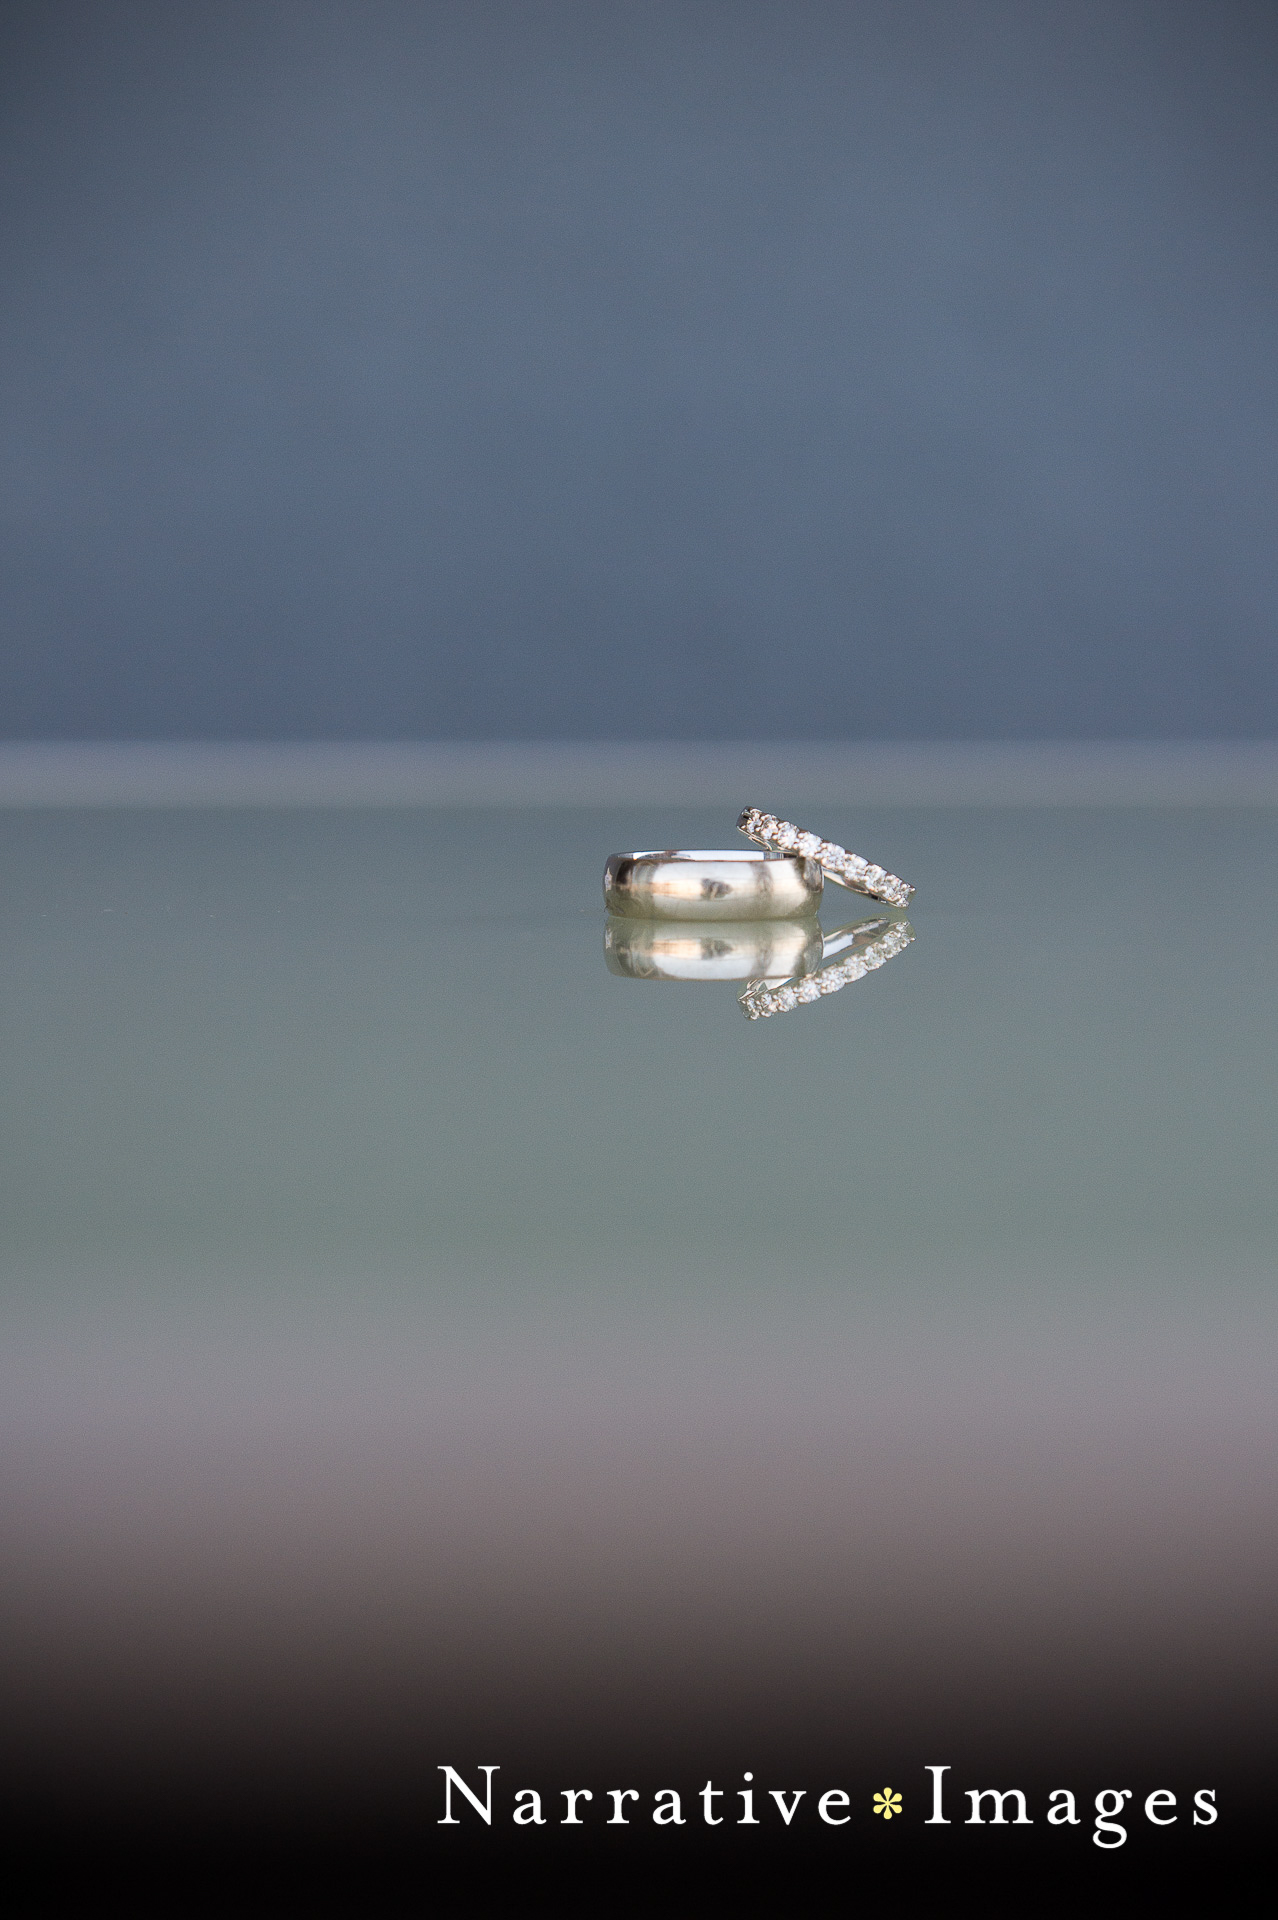 wedding rings reflected on surface